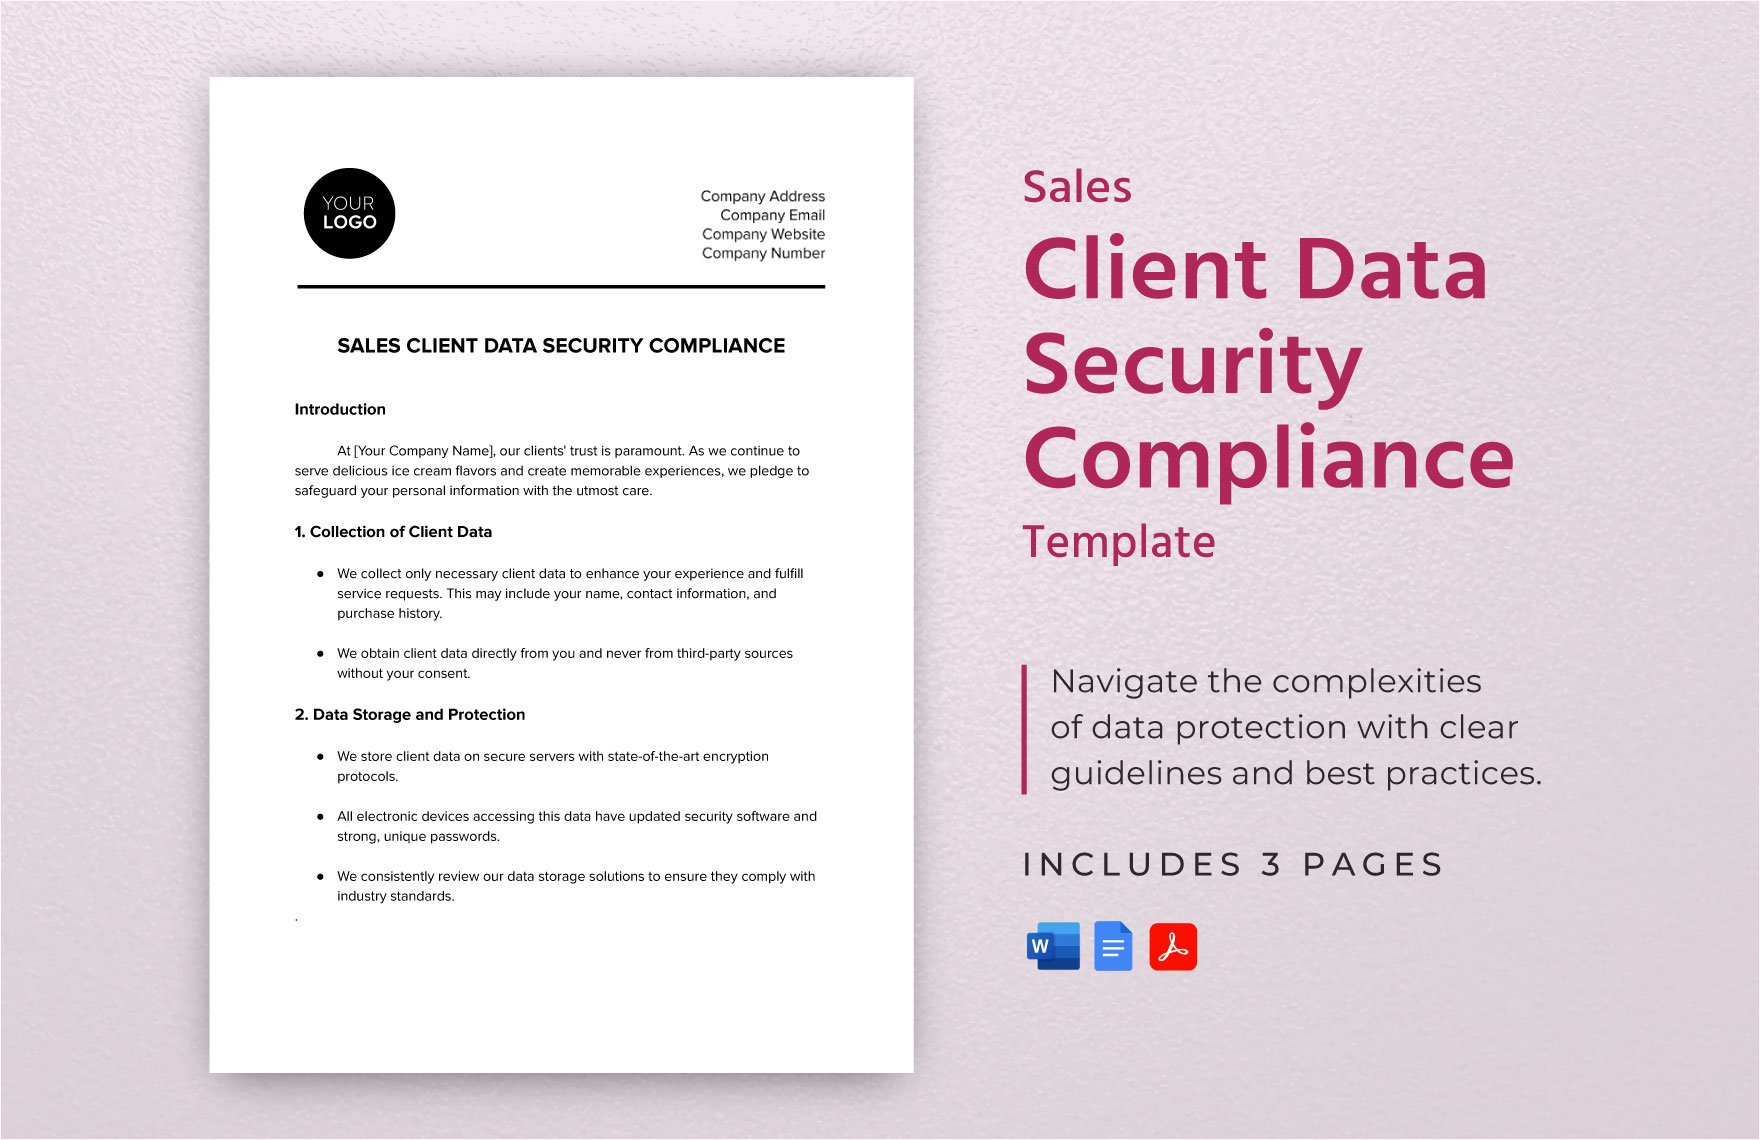 Sales Client Data Security Compliance Template in Word, Google Docs, PDF